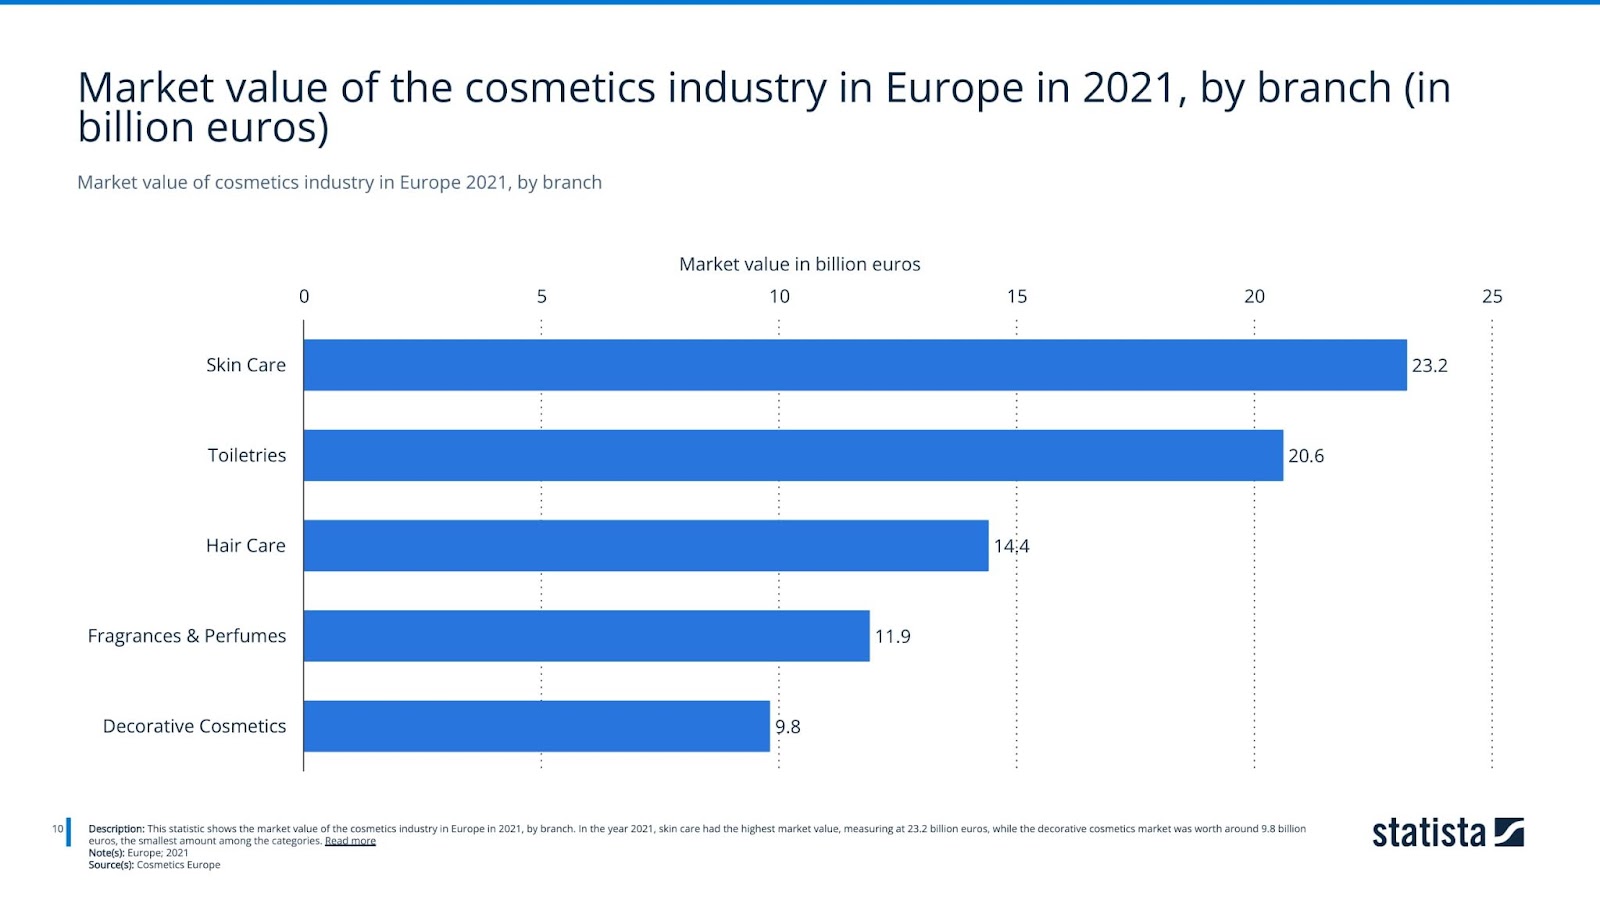 Market value of cosmetics industry in Europe 2021, by branch